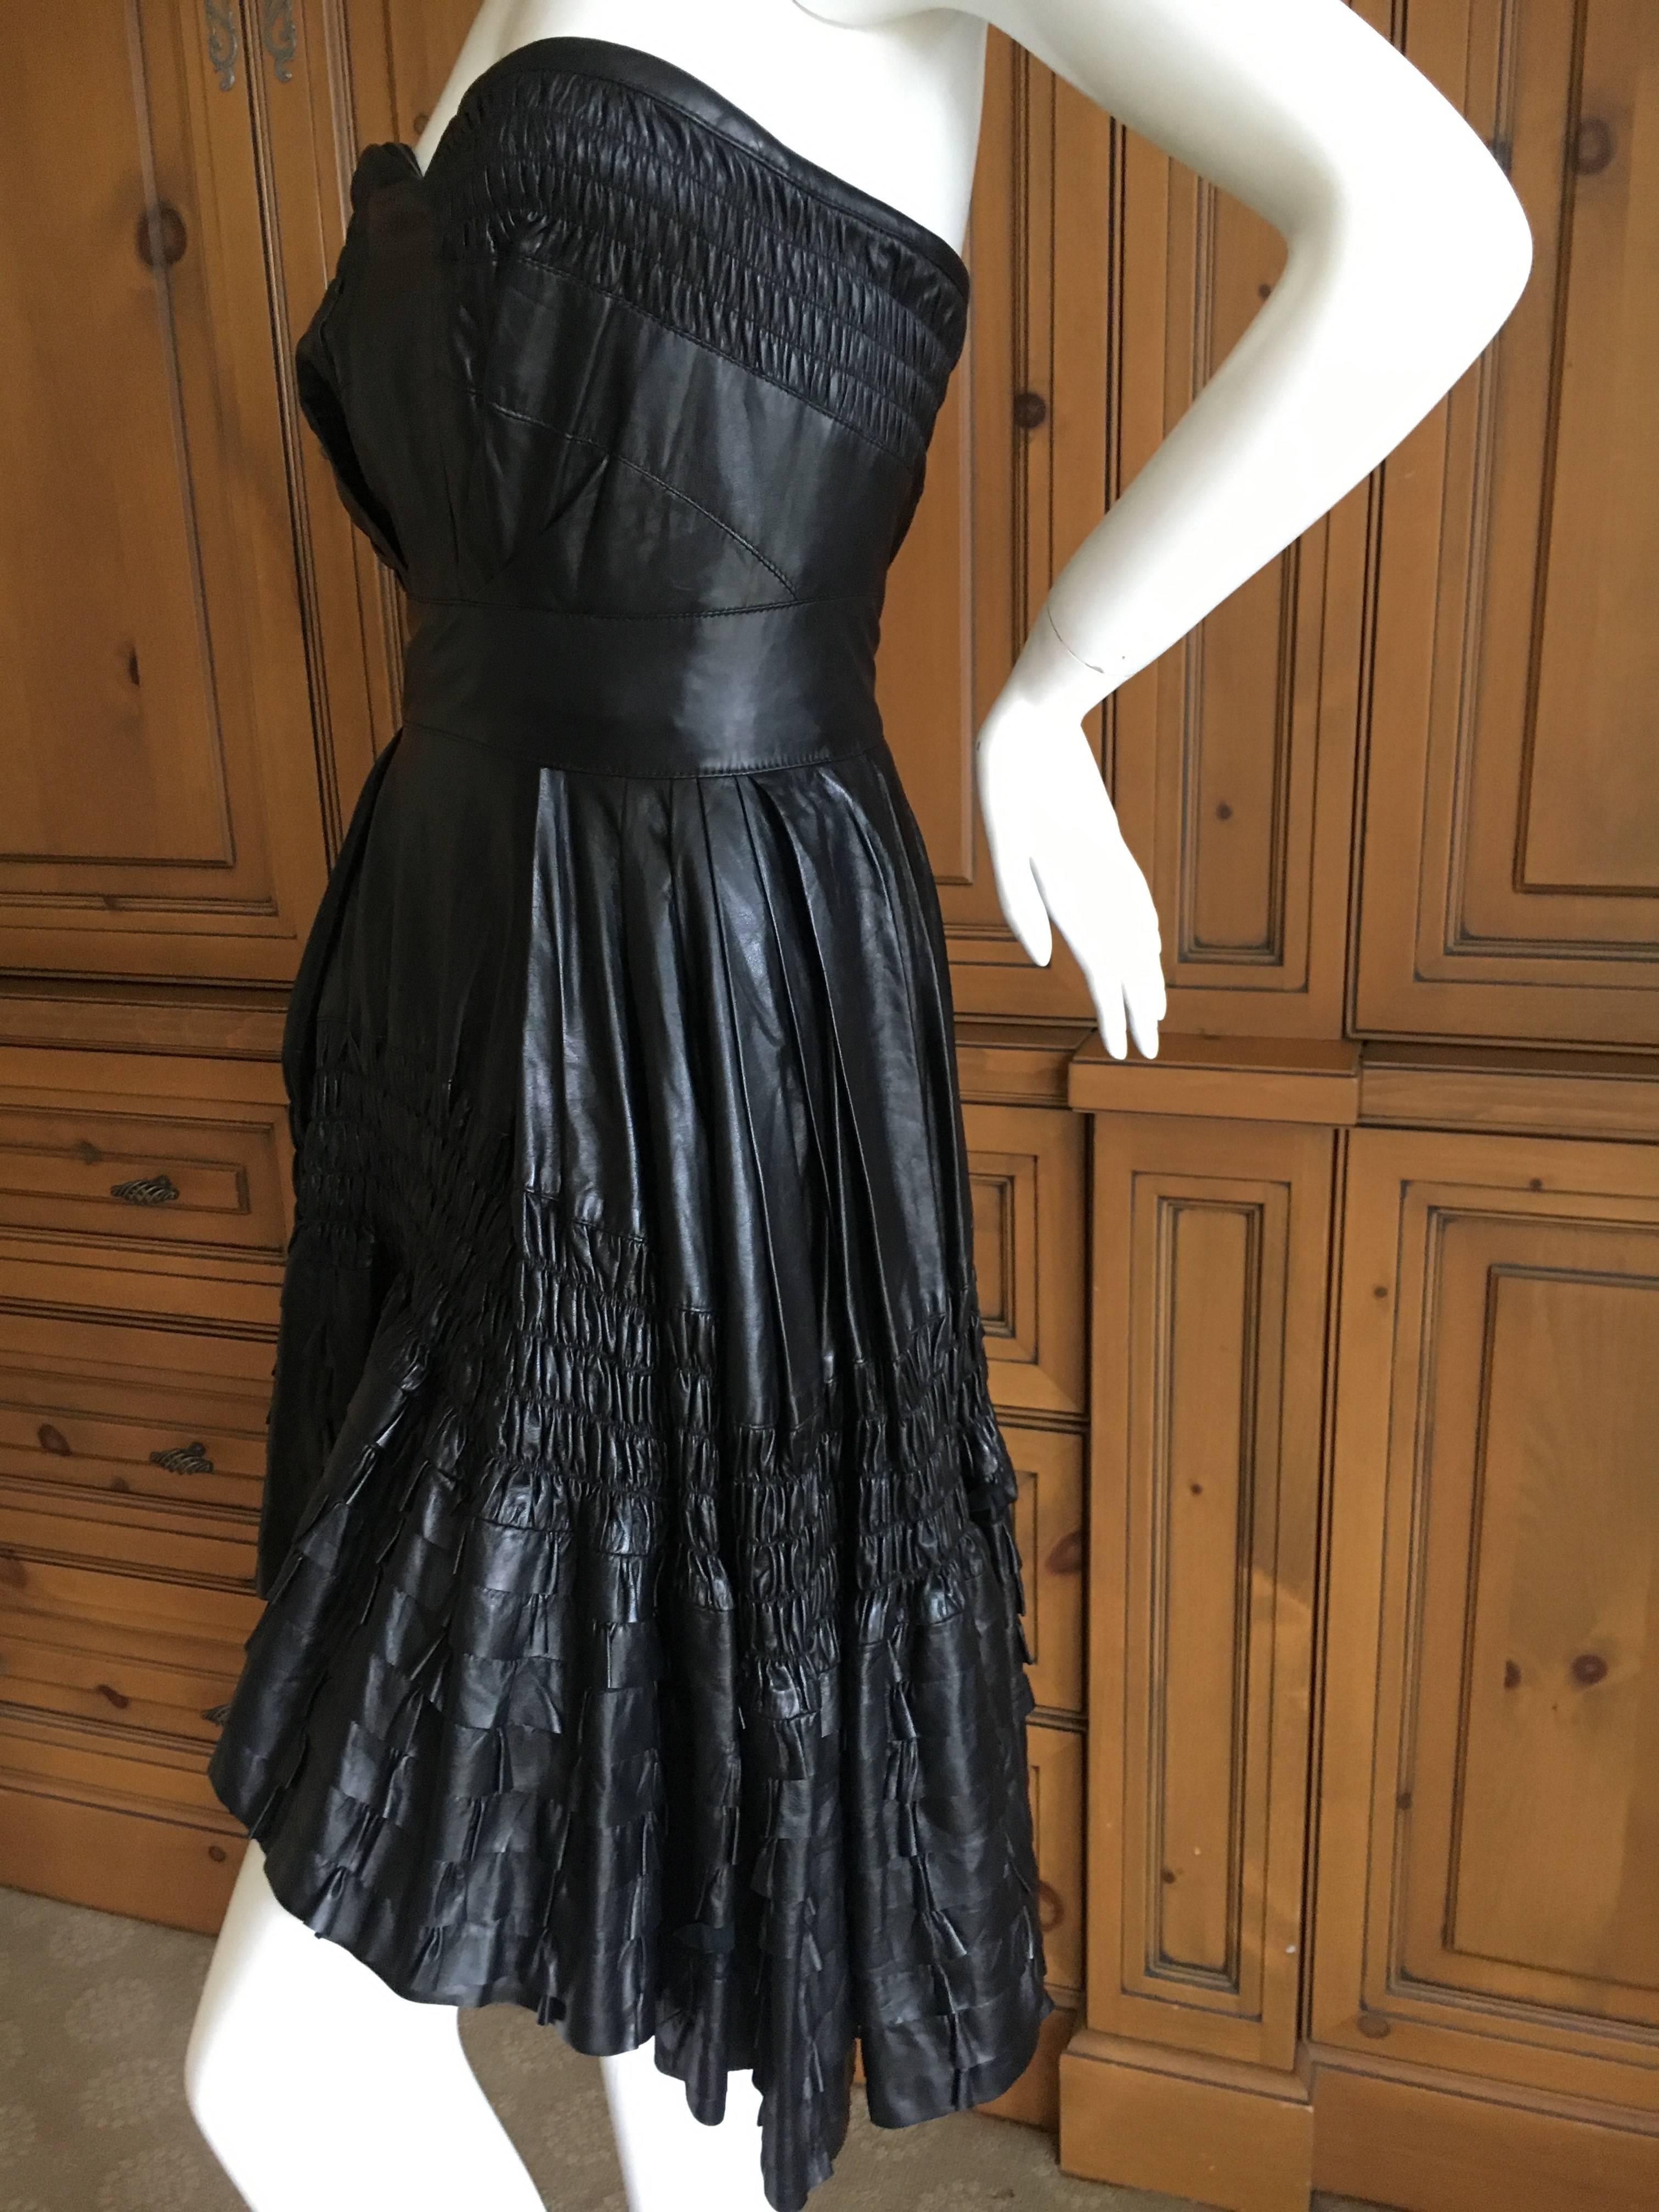 Women's Christian Dior by John Galliano Fall 2010 Black Leather Pleated Ruffle Dress For Sale